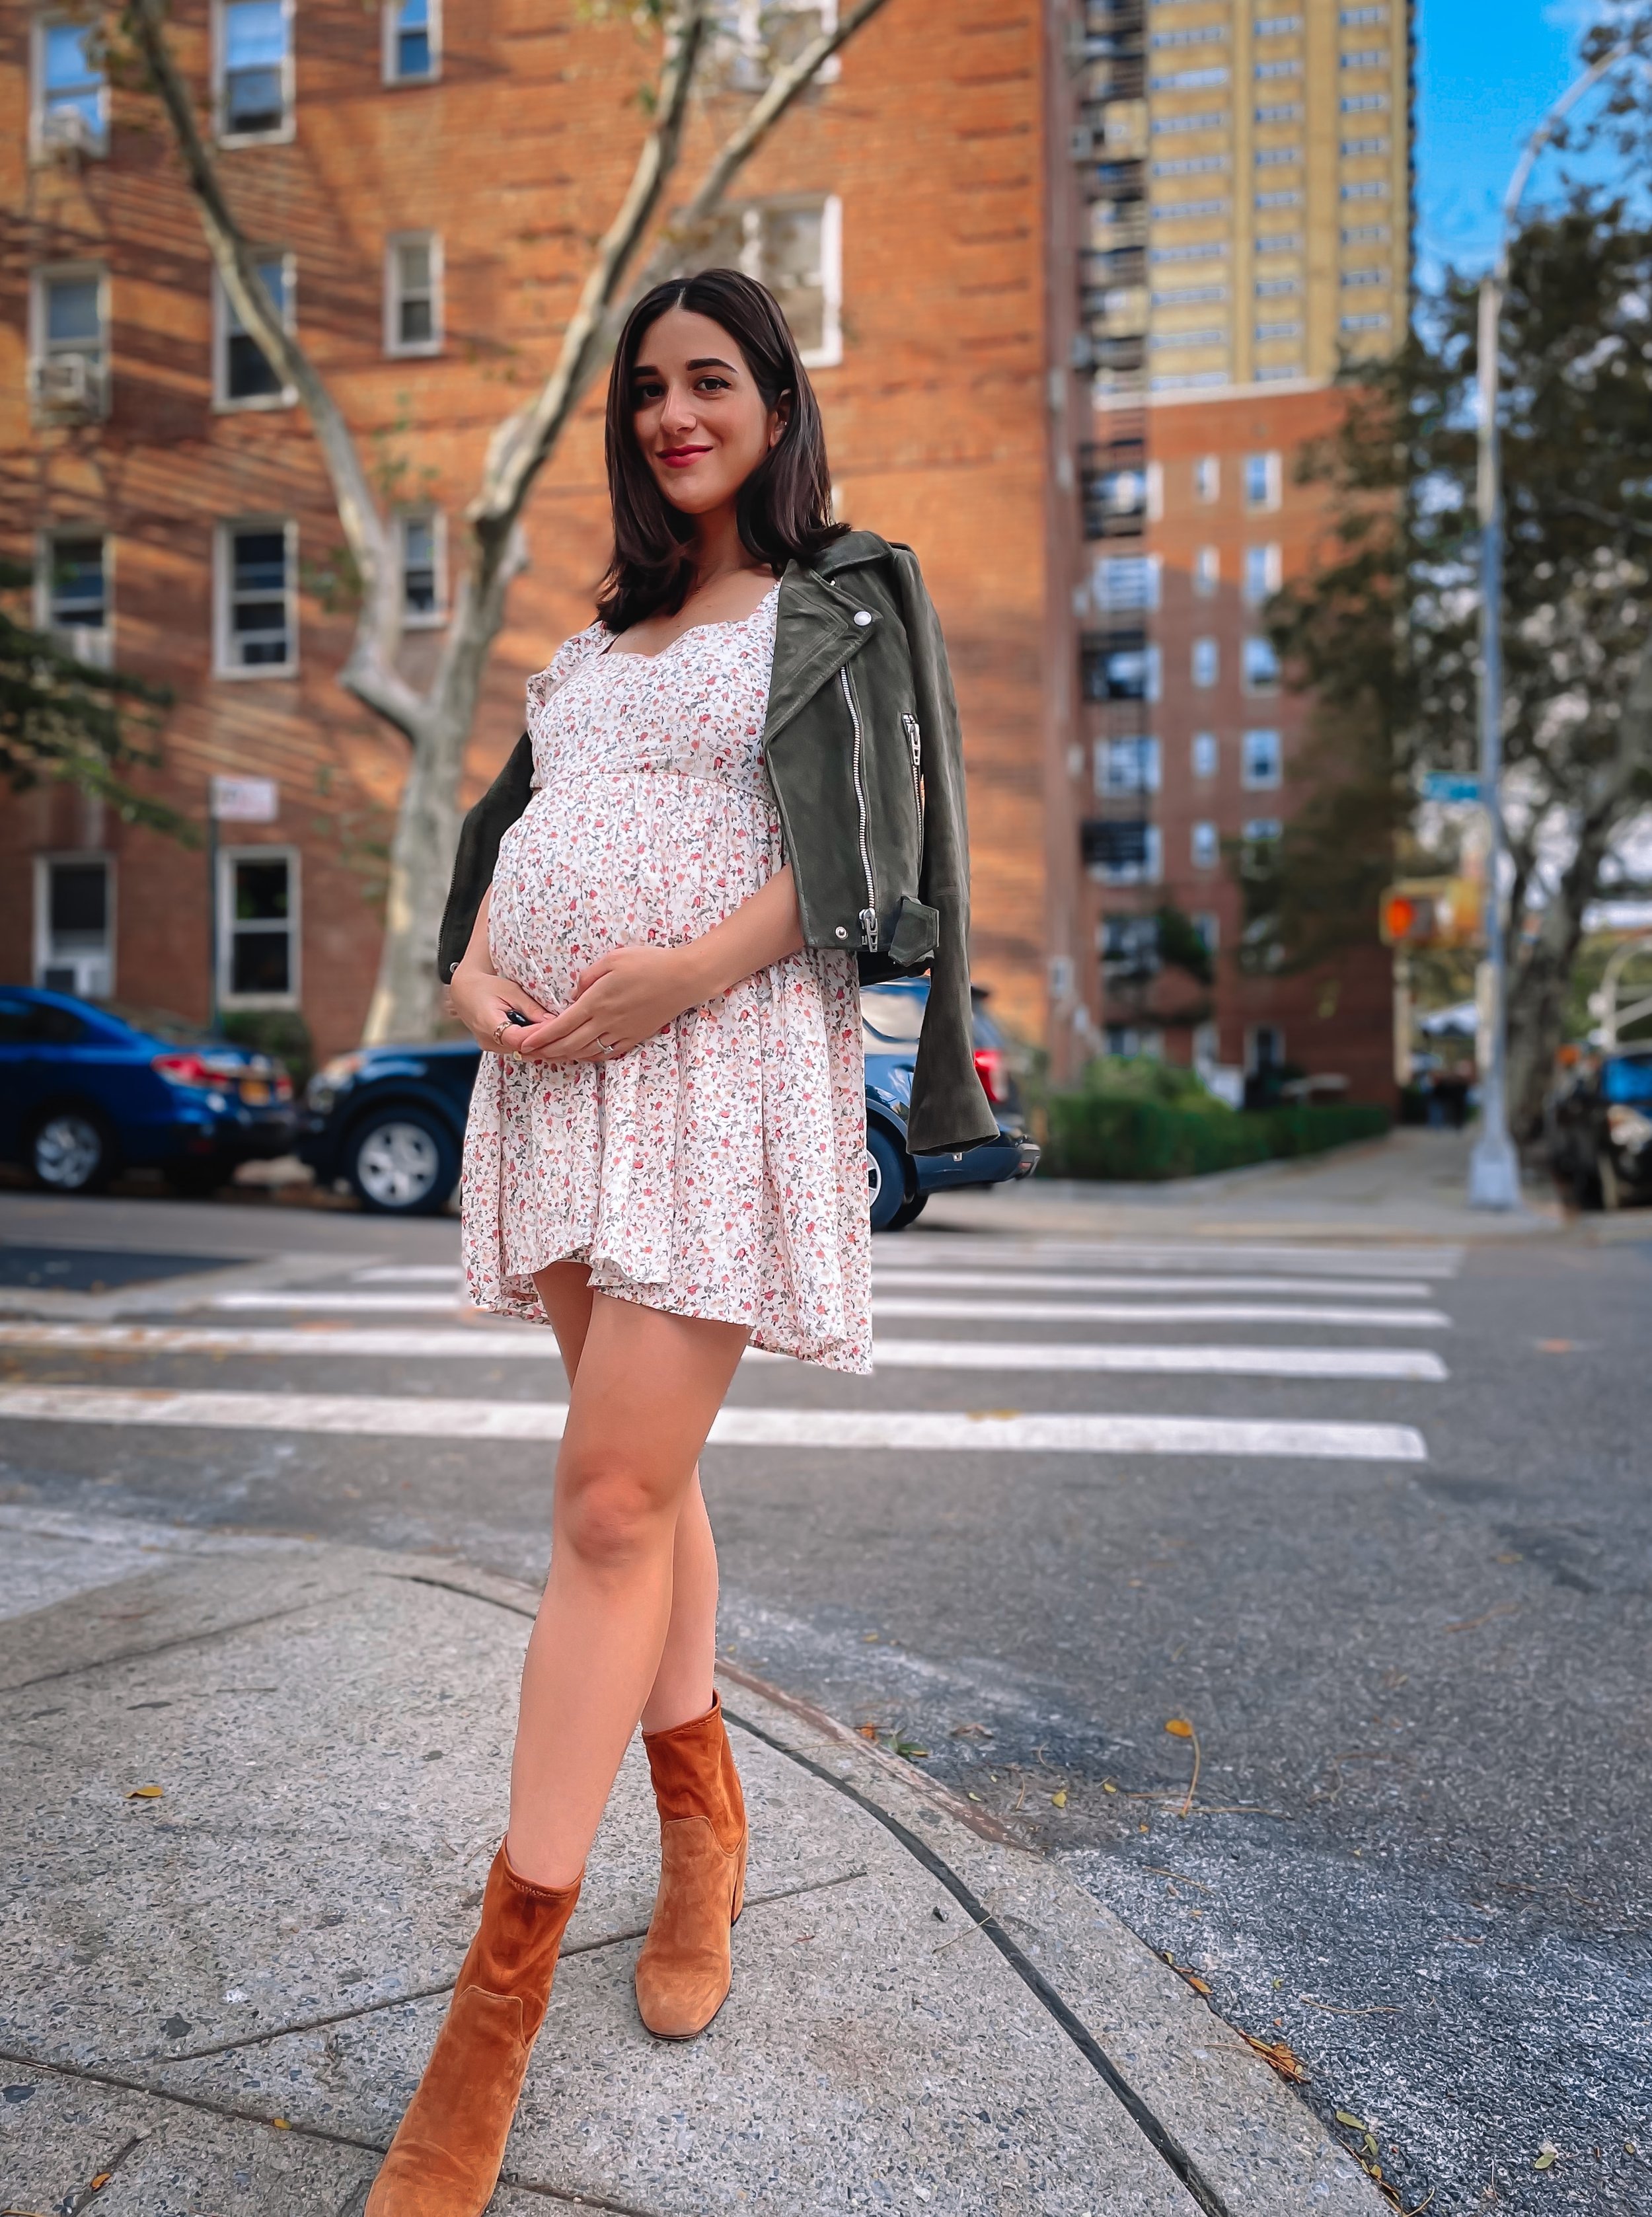 Floral Dress Tan Booties Esther Santer NYC Street Style Bump Friendly Fashion Maternity Look OOTD Olive Green Moto Jacket What To Wear Fall Pregnancy Baby Get Dressed Bumpdate IVF Success Feminine New York City Girl Women Tripod Photoshoot Shoes Boots.JPG